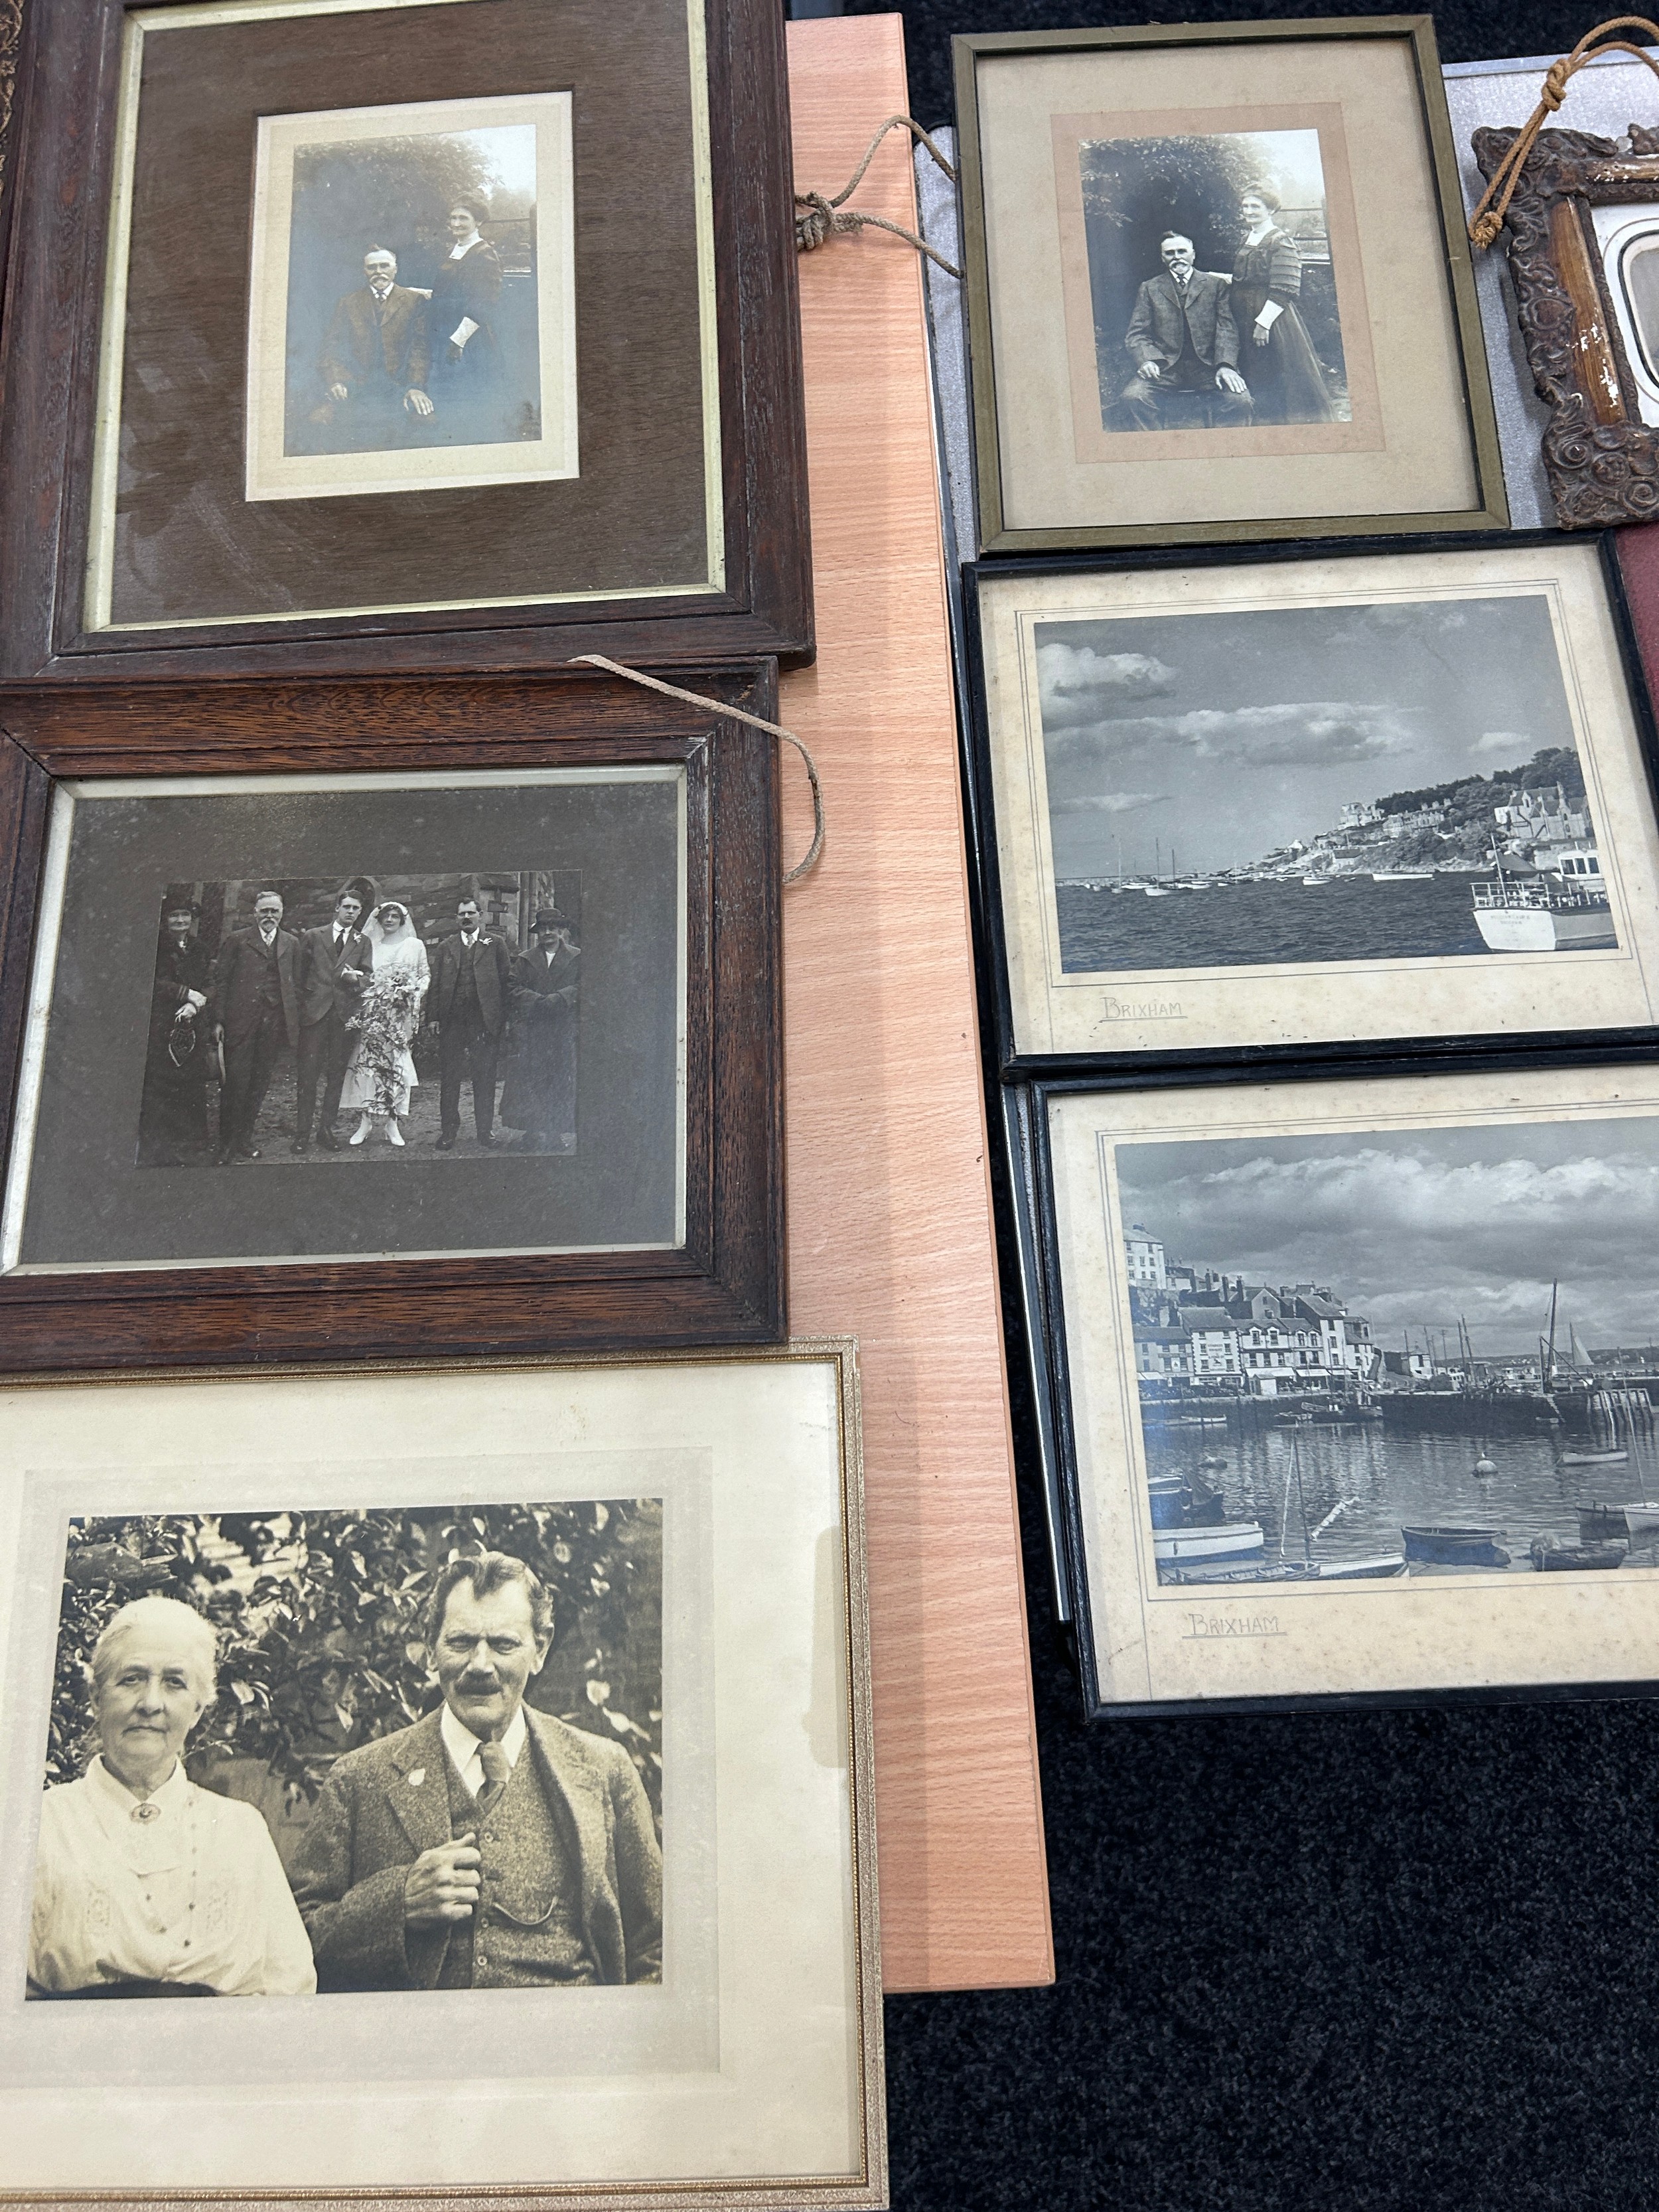 Large selection of framed antique photos largest measures approximately 16 inches by 16 inches - Image 10 of 10